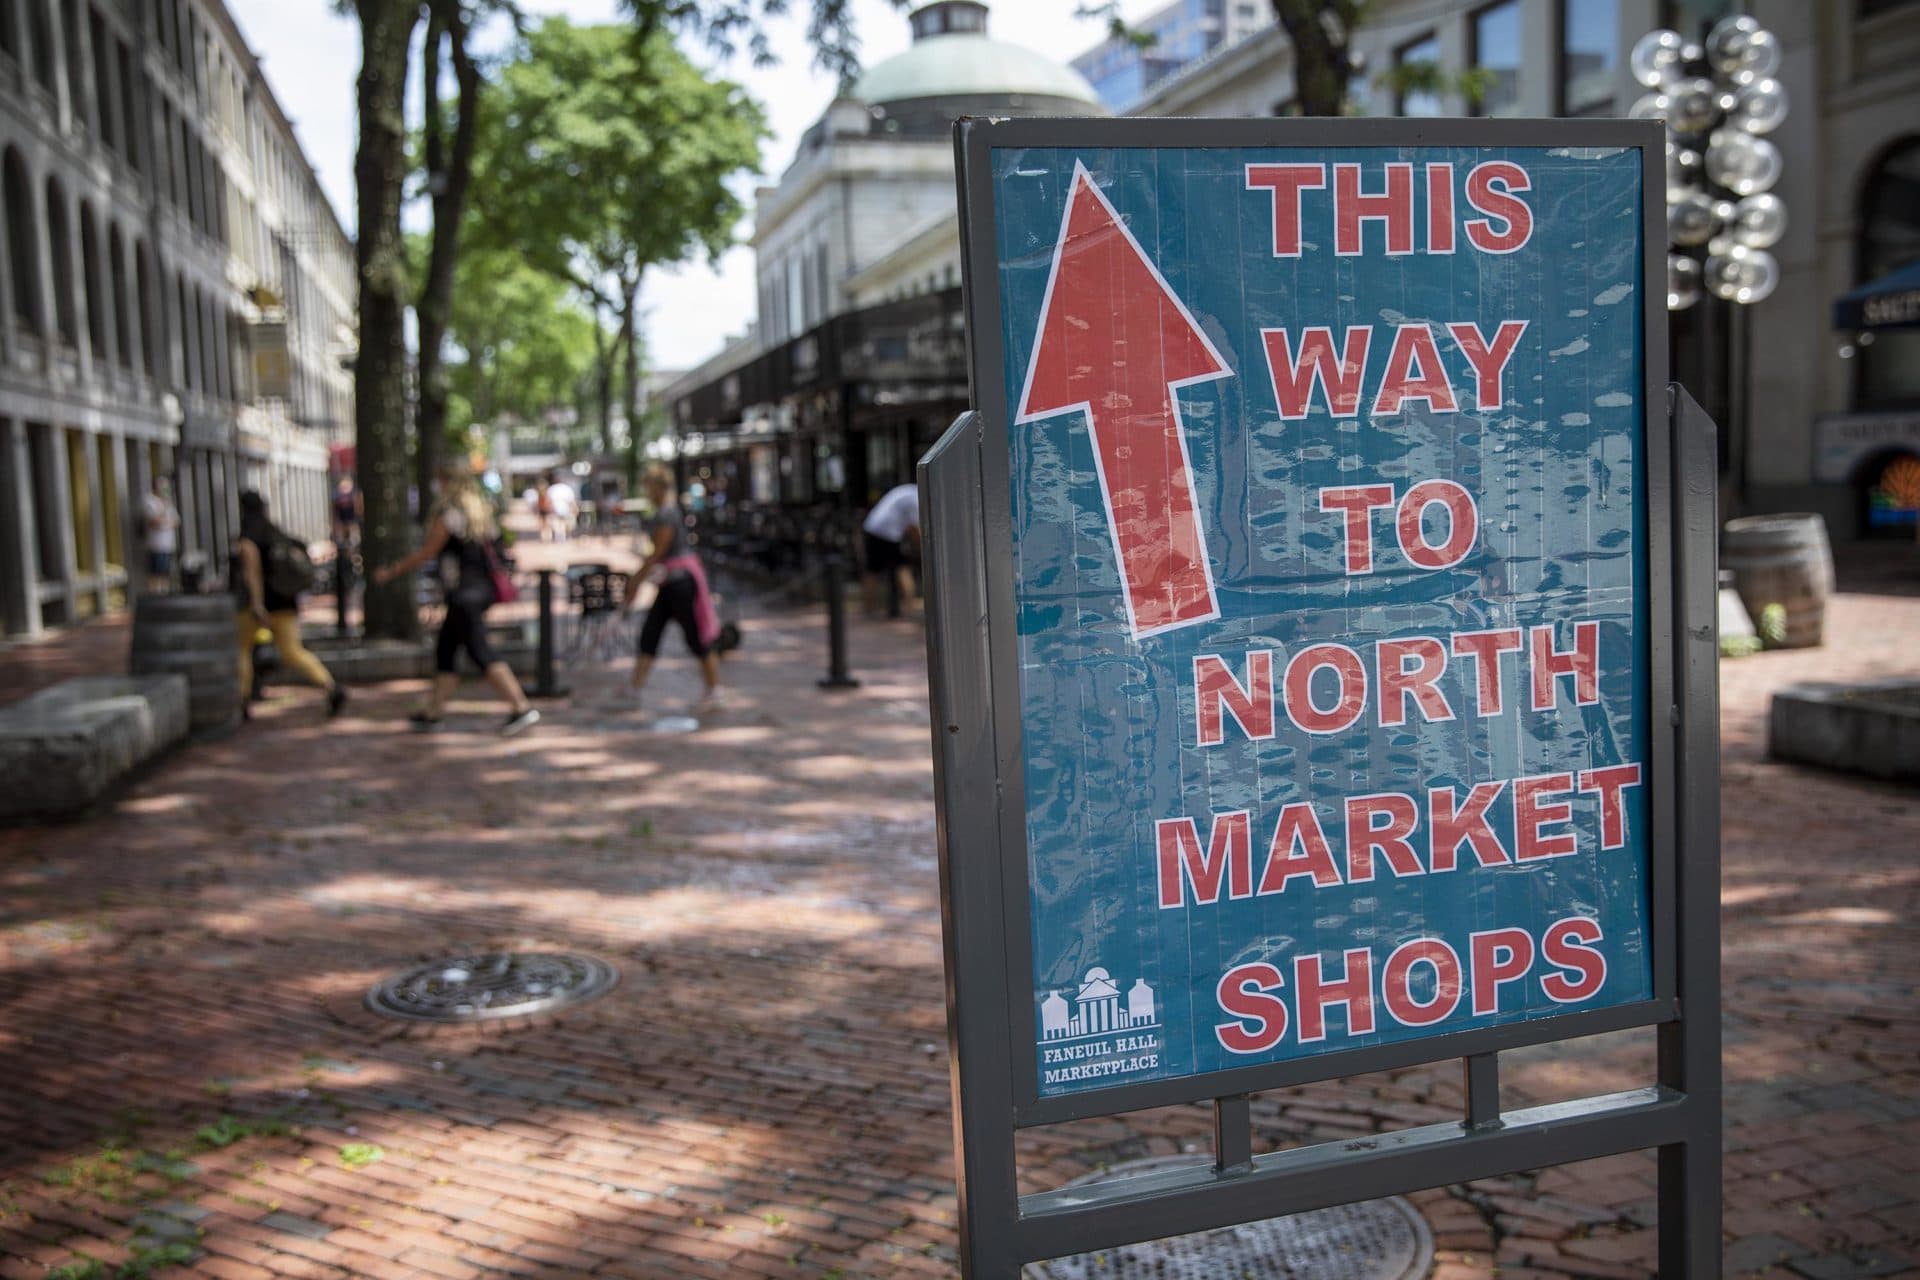 Quincy Market and Faneuil Hall Marketplace officially reopen after closing in March to slow the spread of the coronavirus. (Robin Lubbock/WBUR)